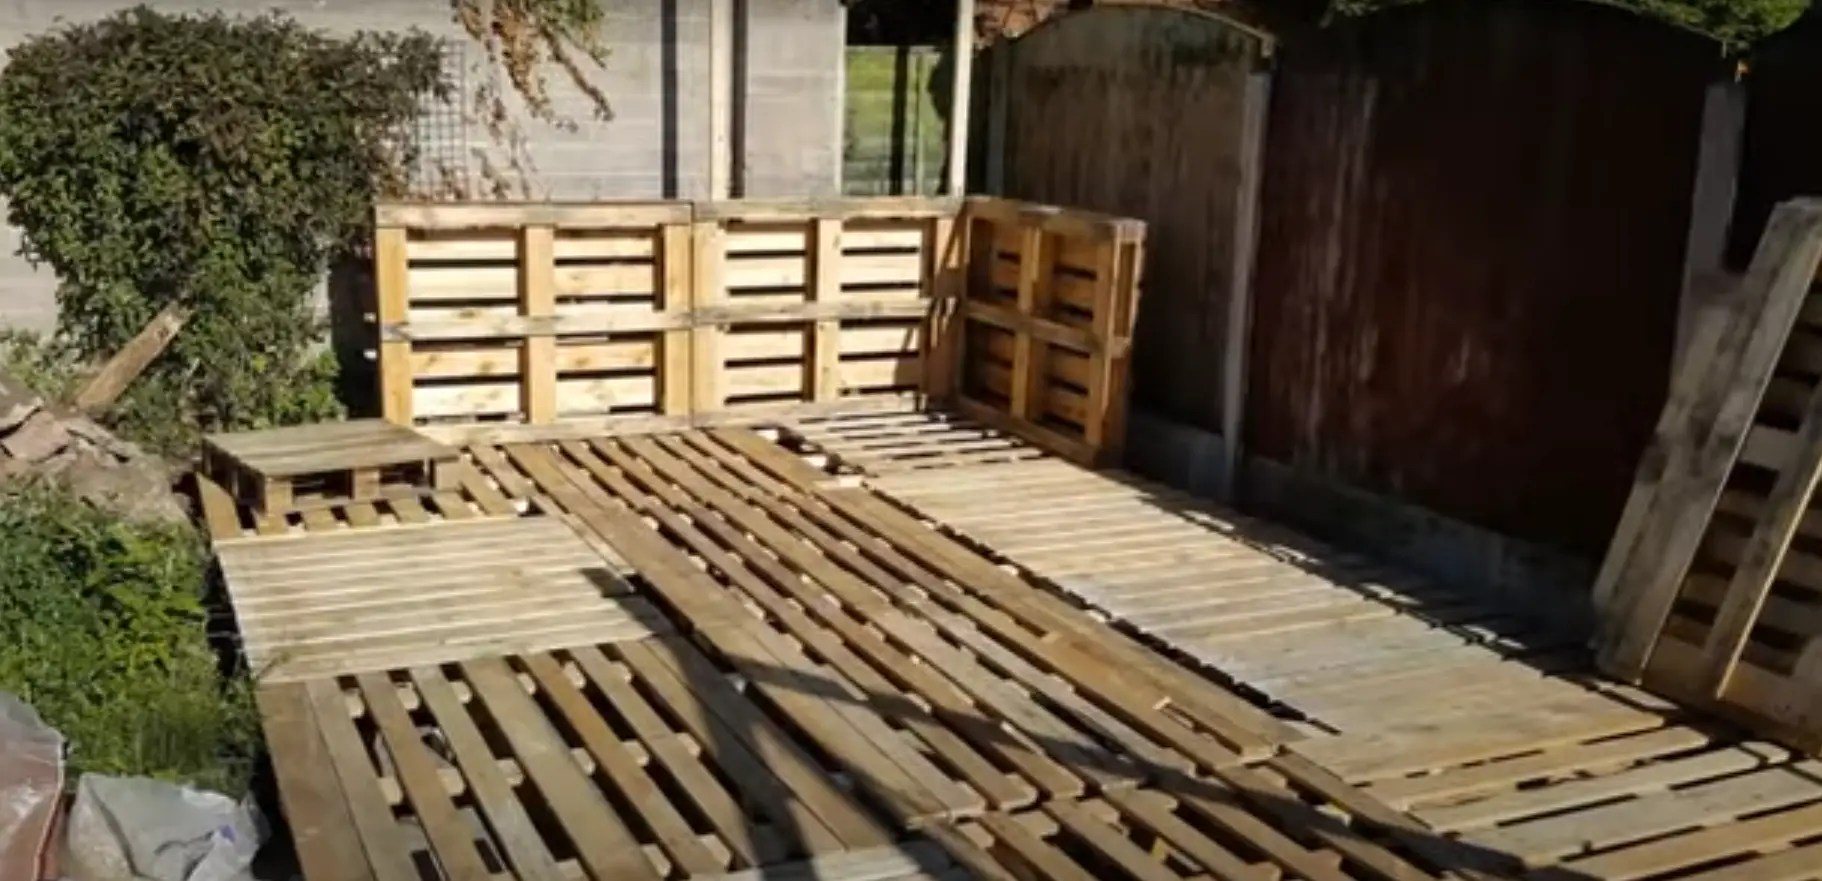 Why Should You Build a Shed with Pallets?